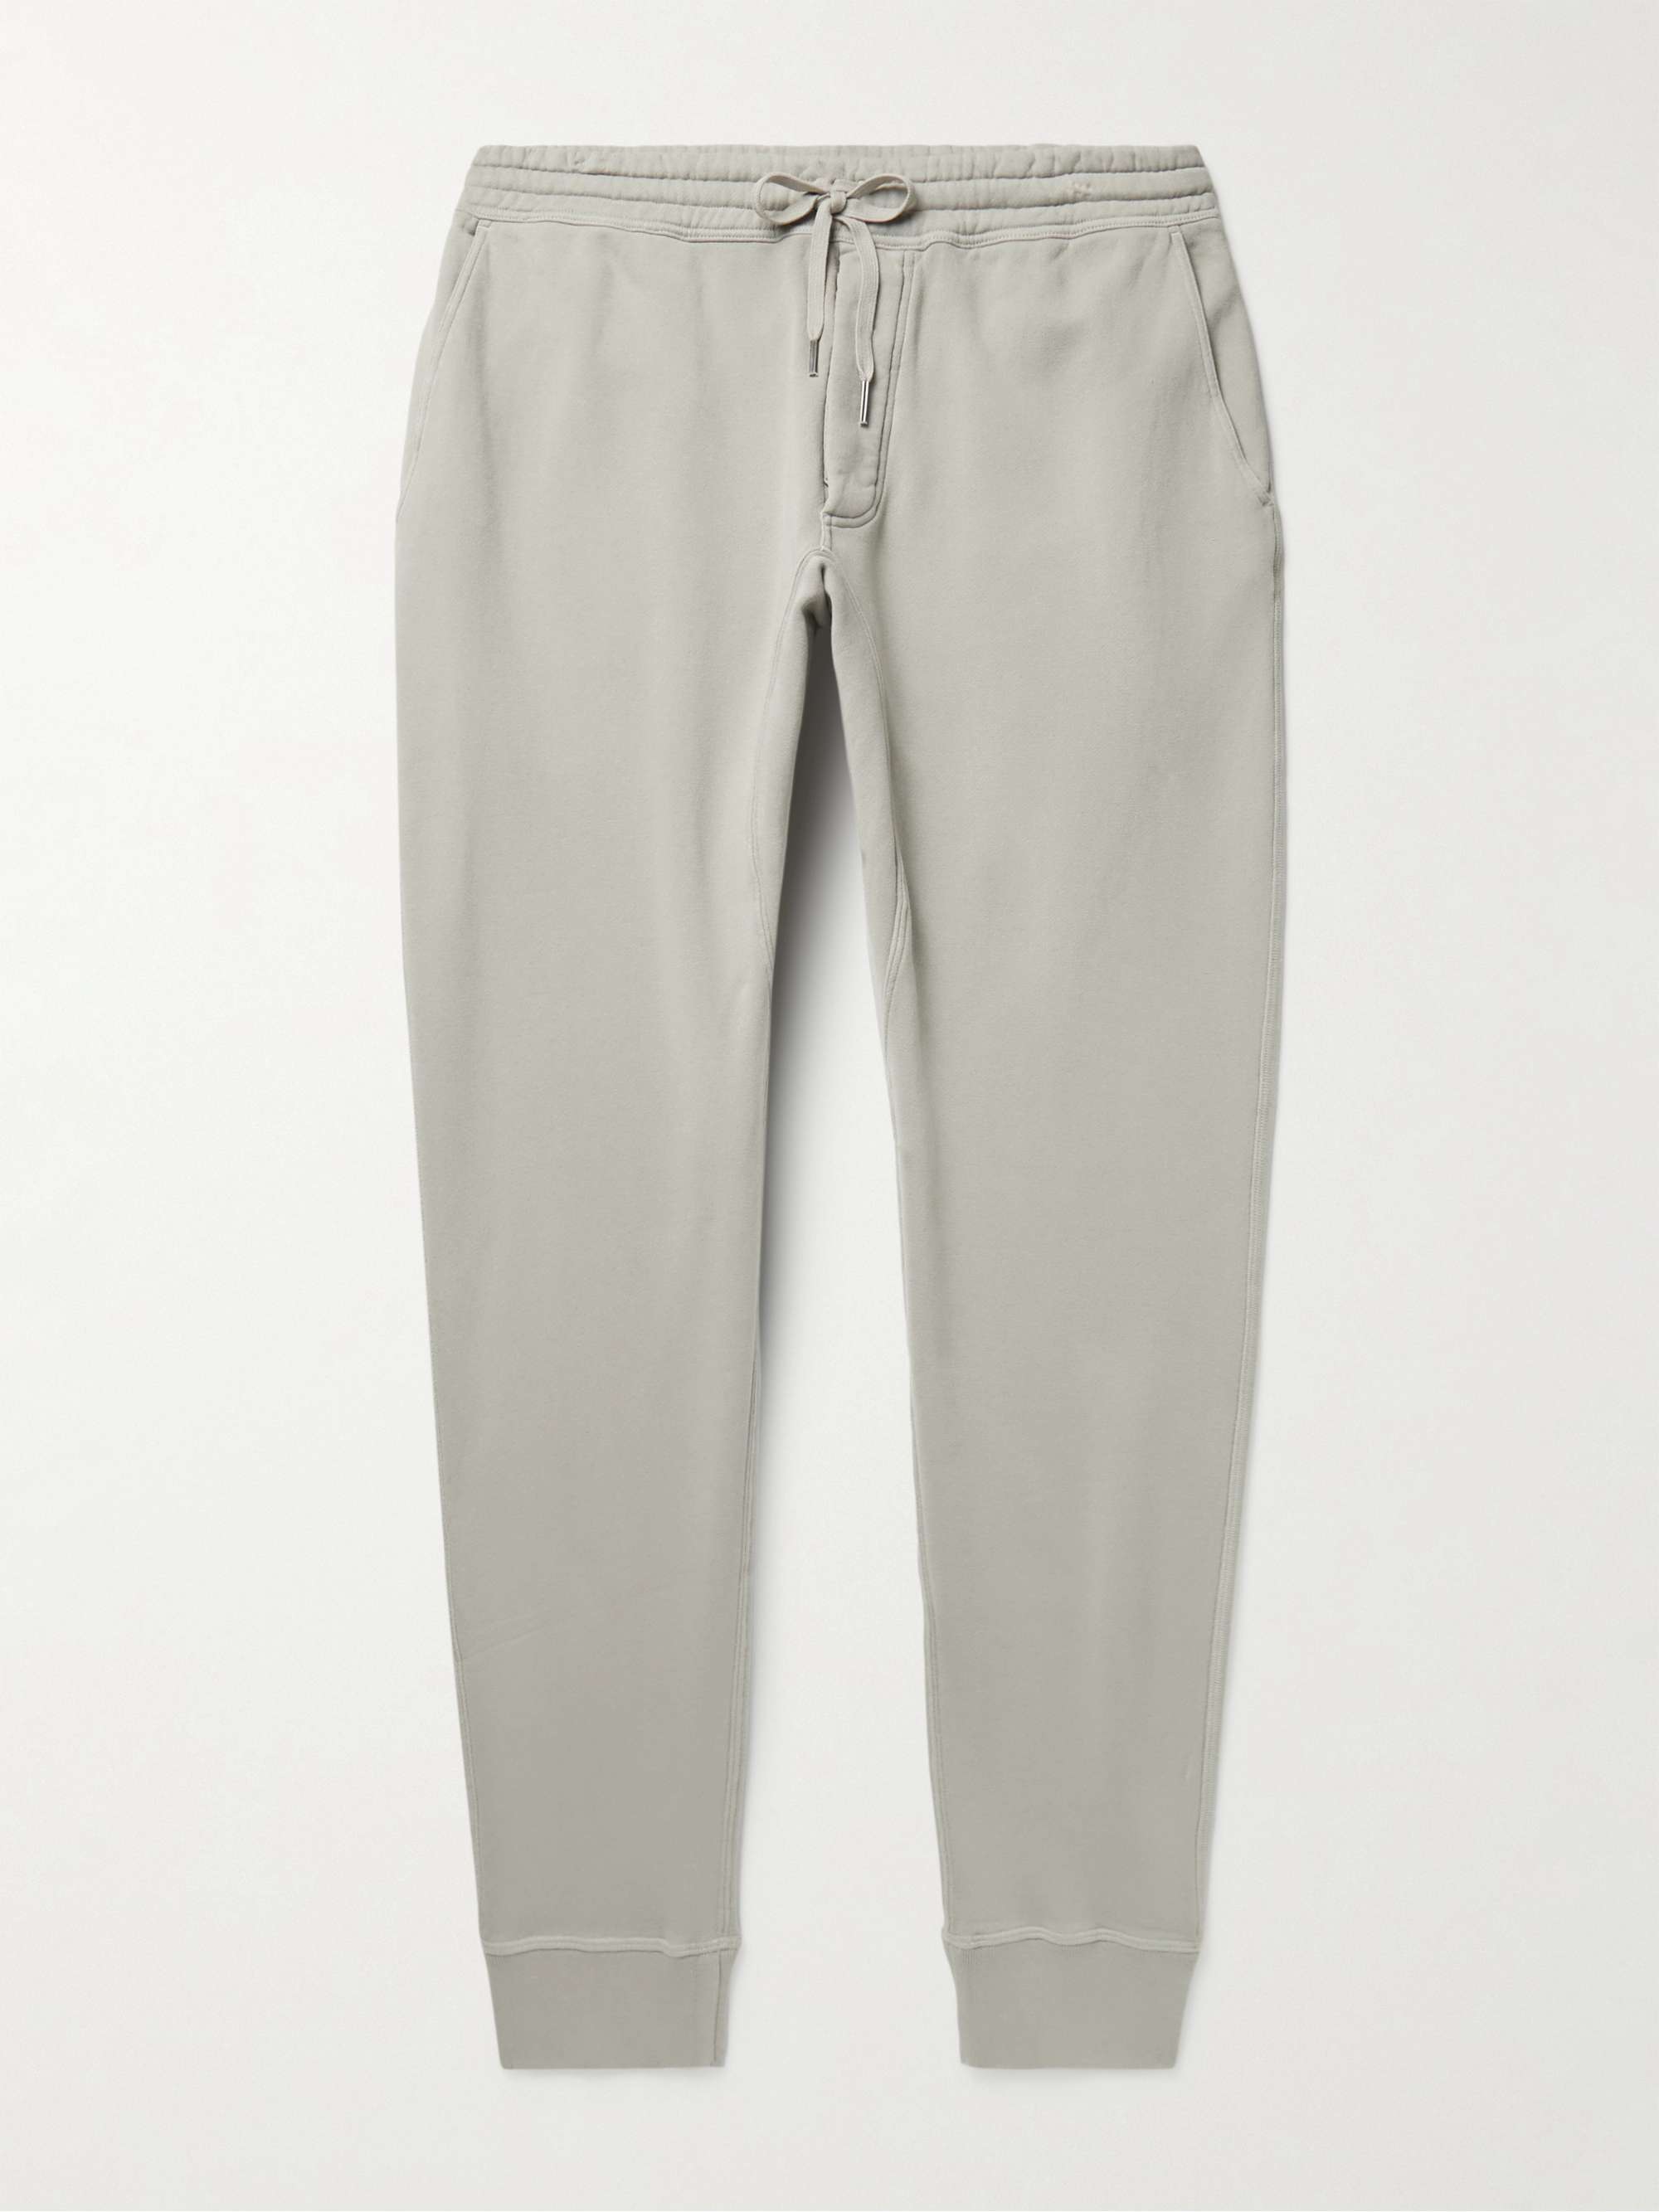 TOM FORD Tapered Garment-Dyed Cotton-Jersey Sweatpants for Men | MR PORTER